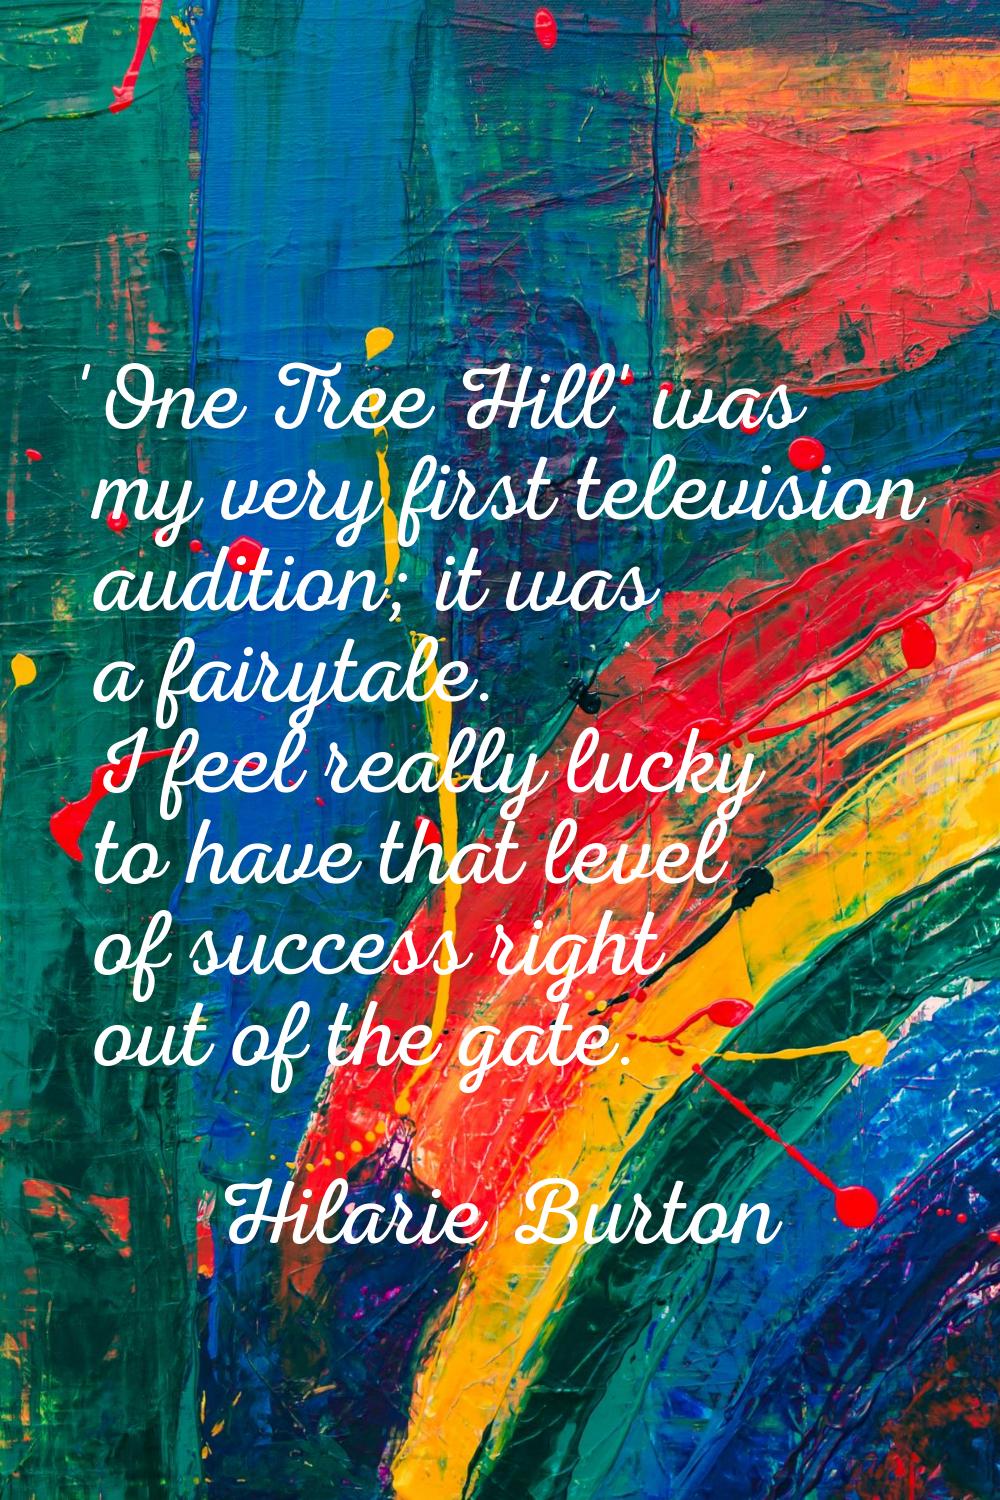 'One Tree Hill' was my very first television audition; it was a fairytale. I feel really lucky to h